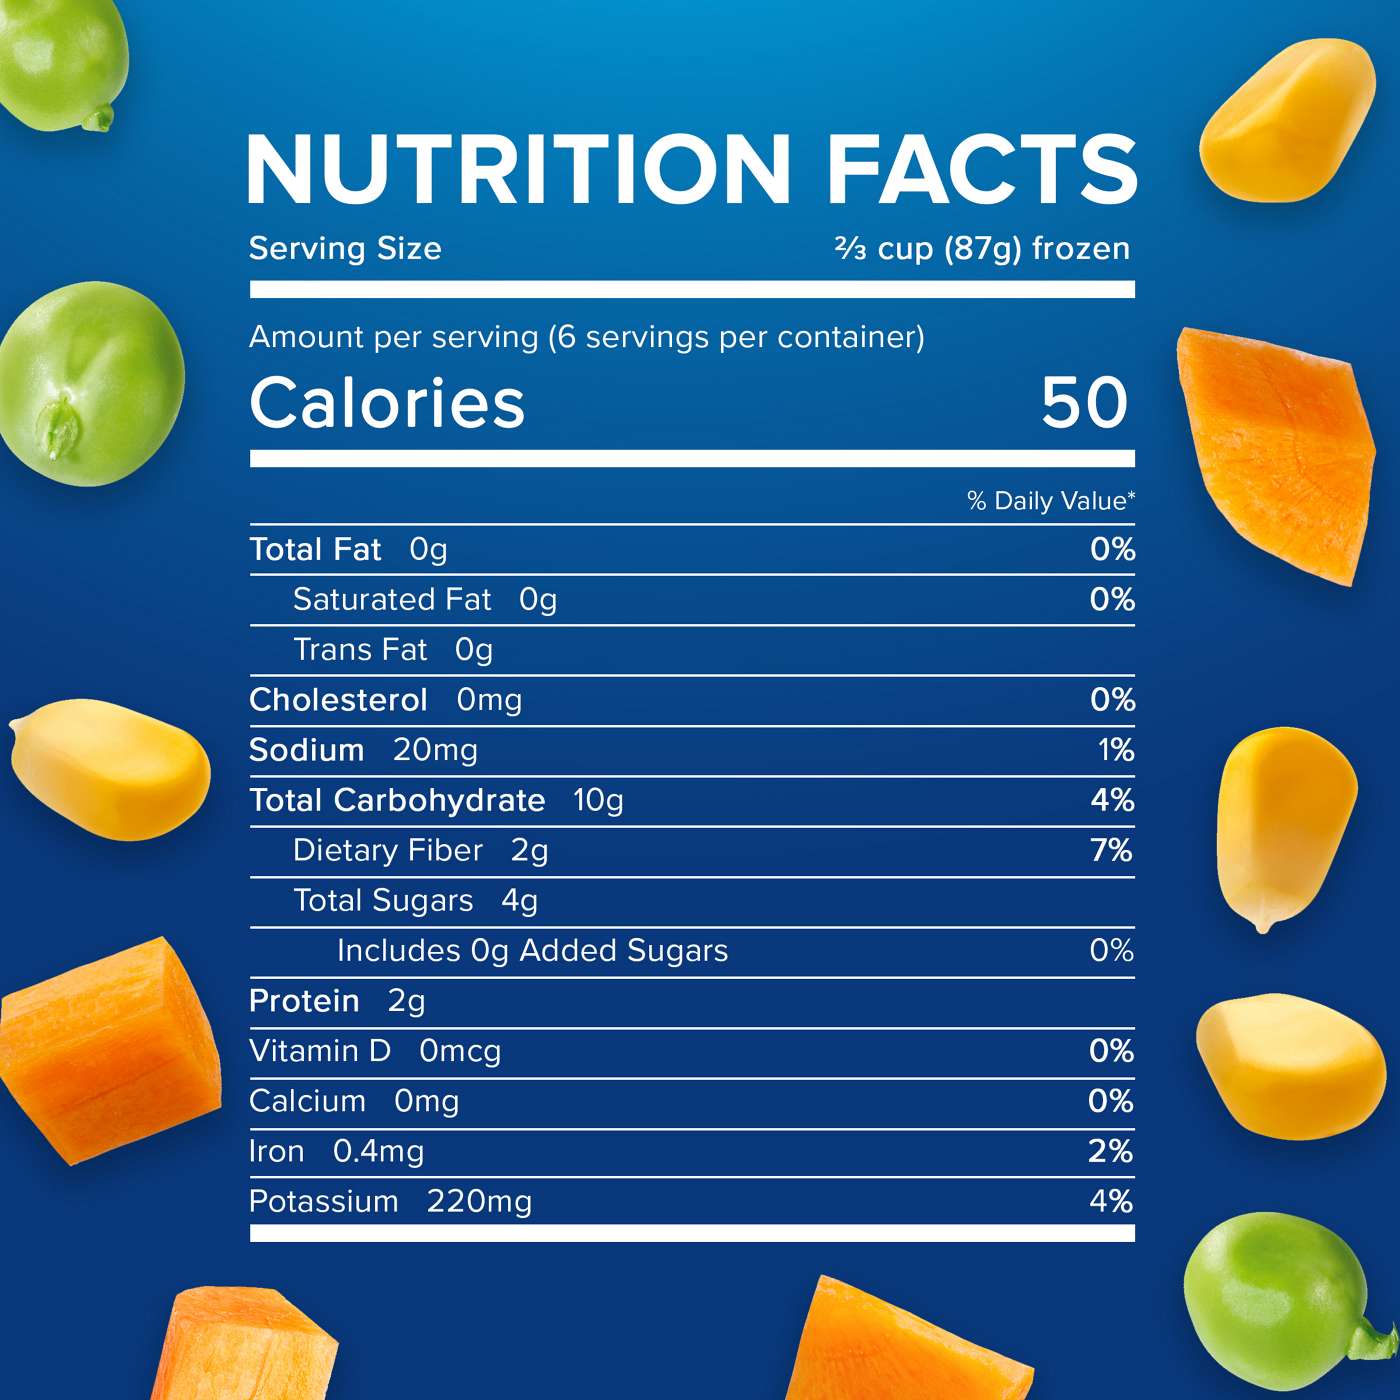 mixed greens Nutrition Facts and Calories, Description